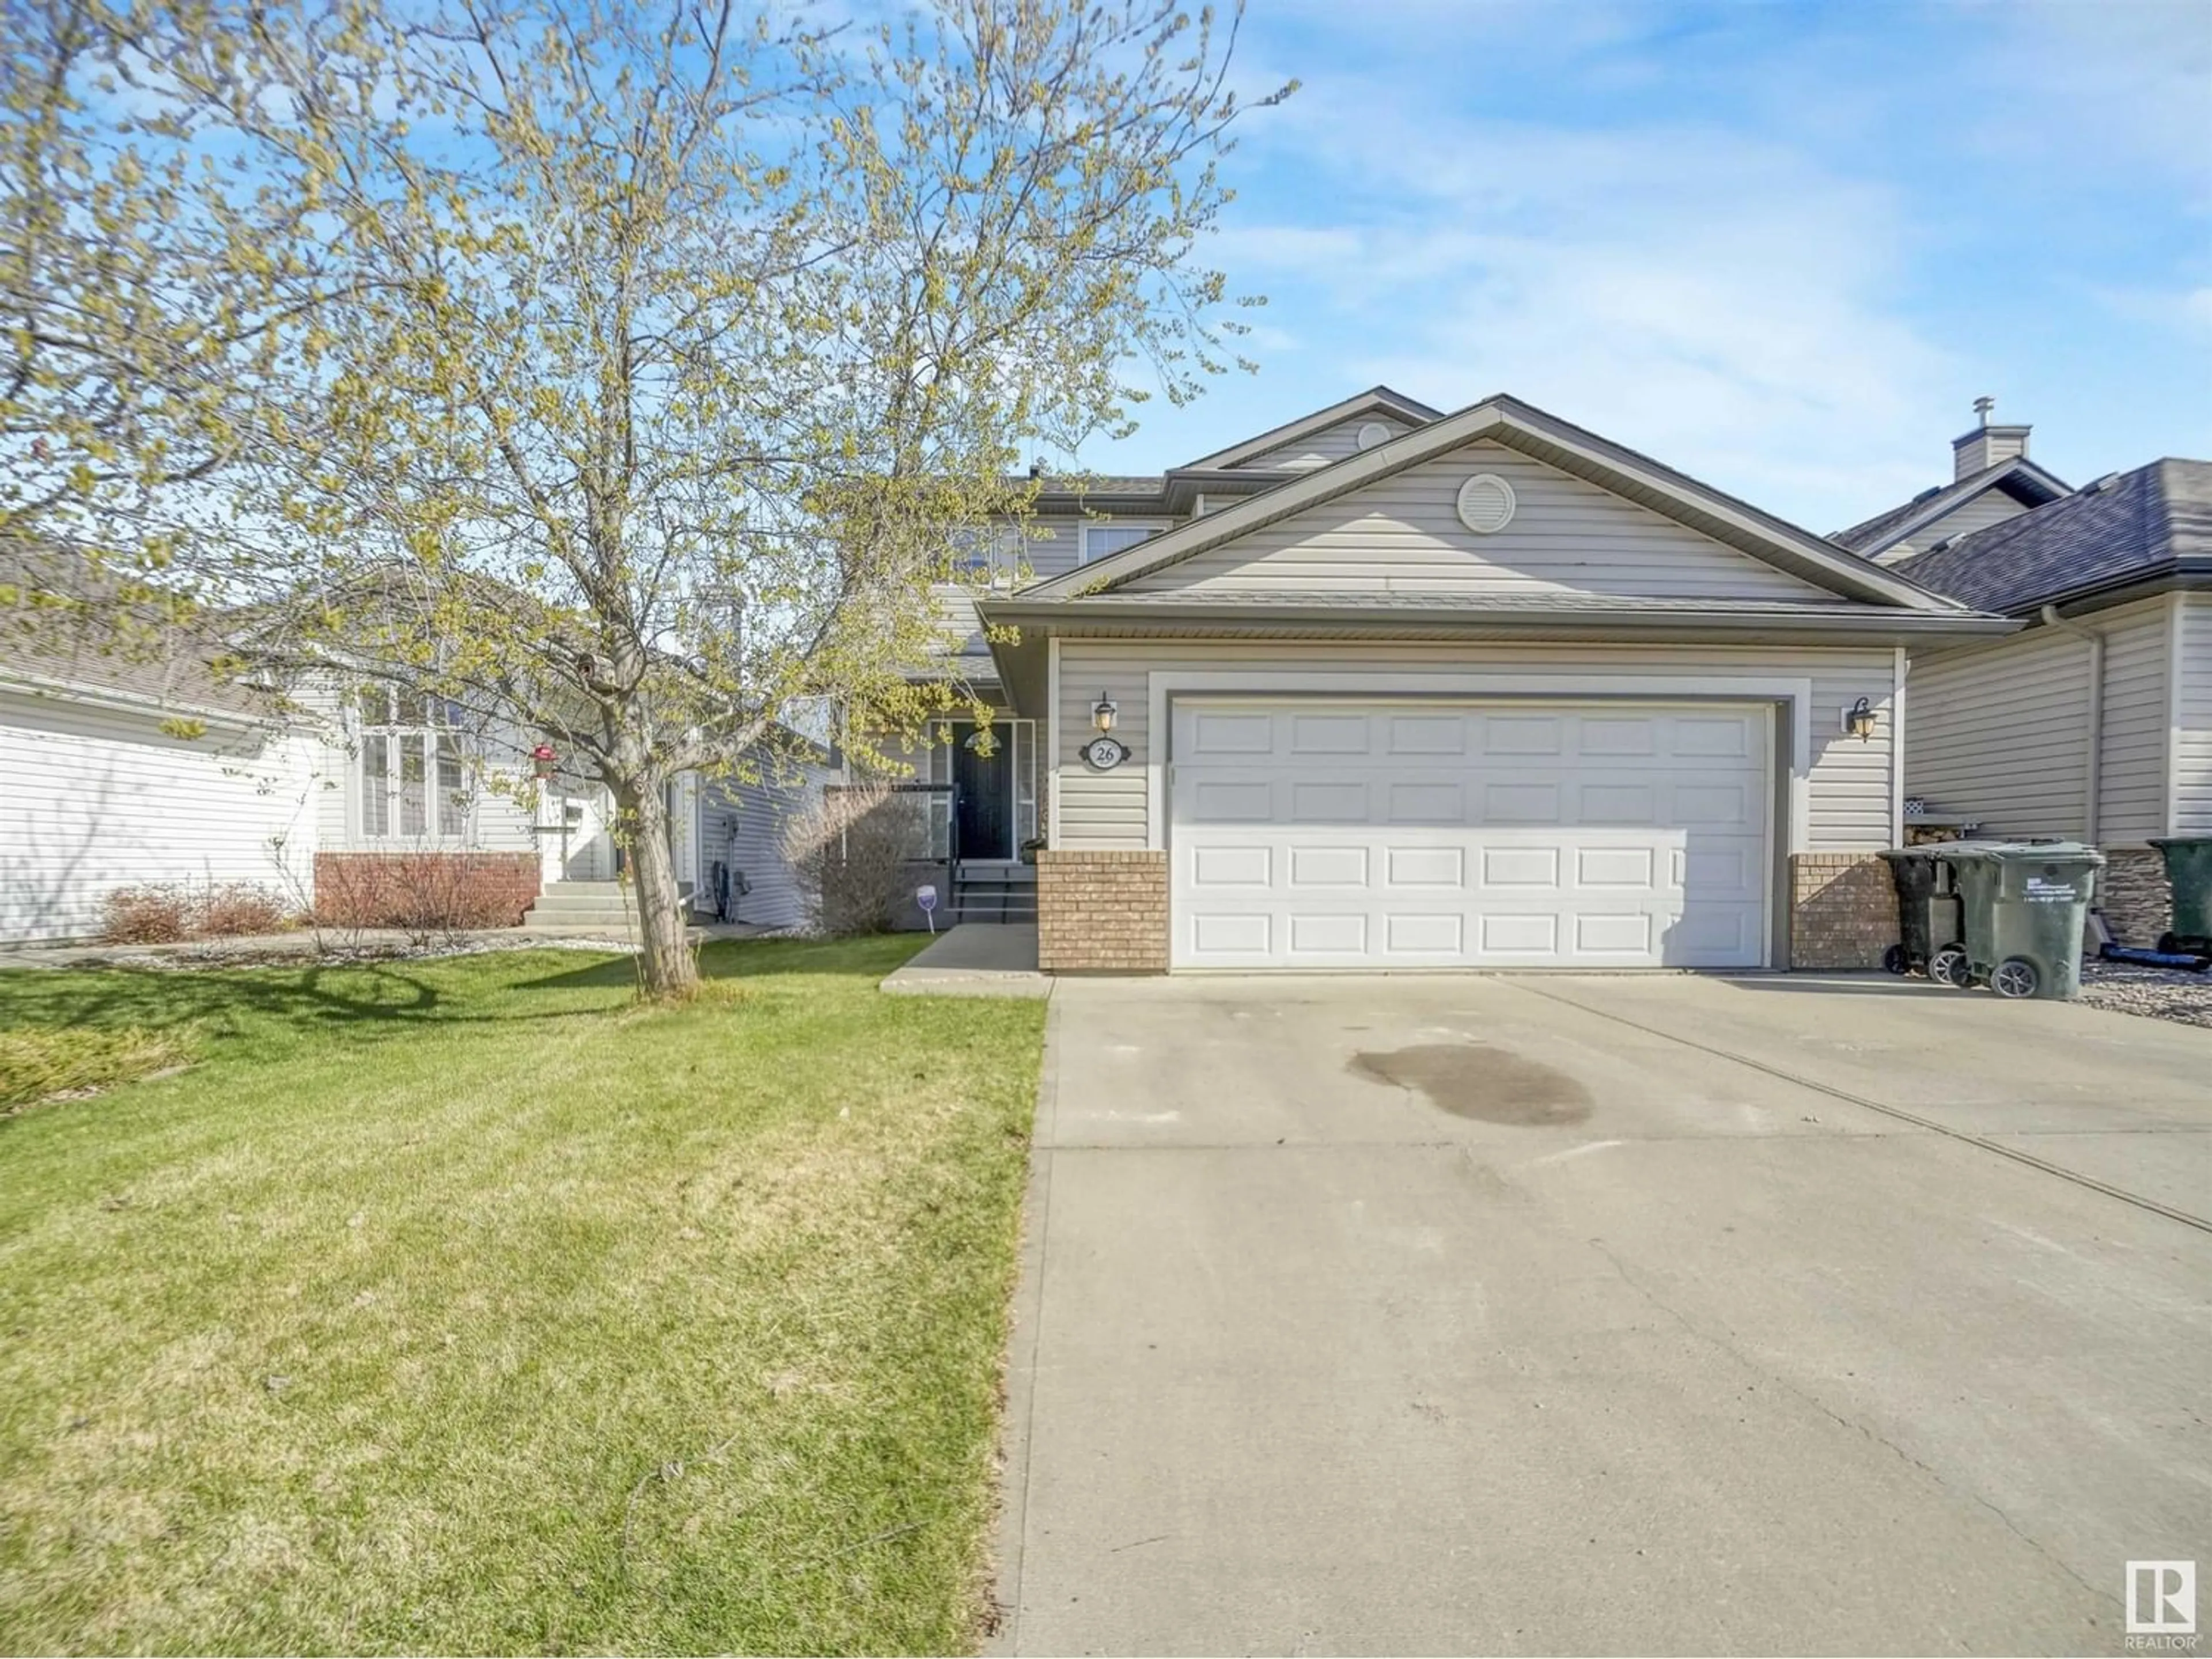 Frontside or backside of a home for 26 Foxhaven WY, Sherwood Park Alberta T8A6L4